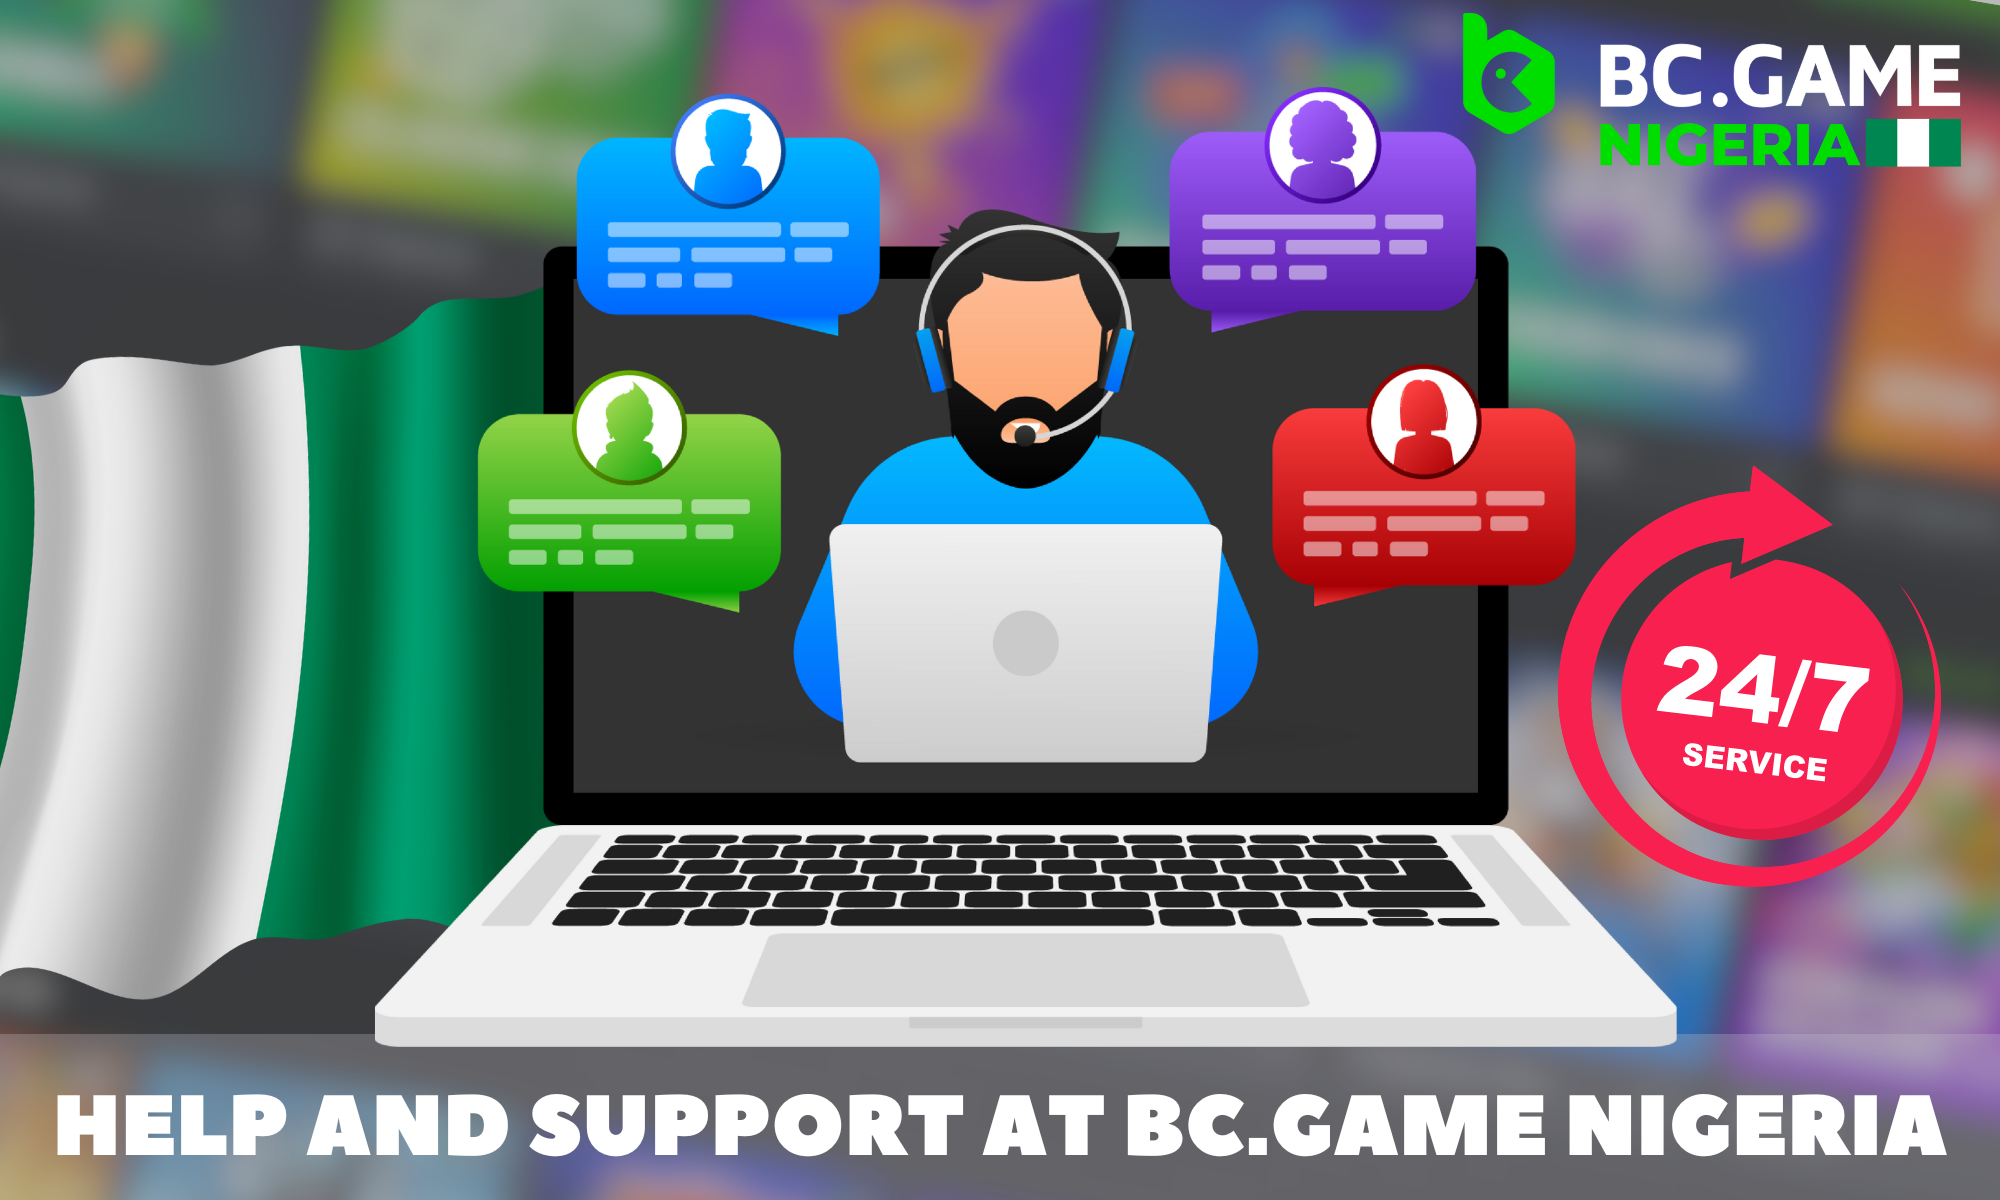 BC.GAME Nigeria's technical support department is available 24/7